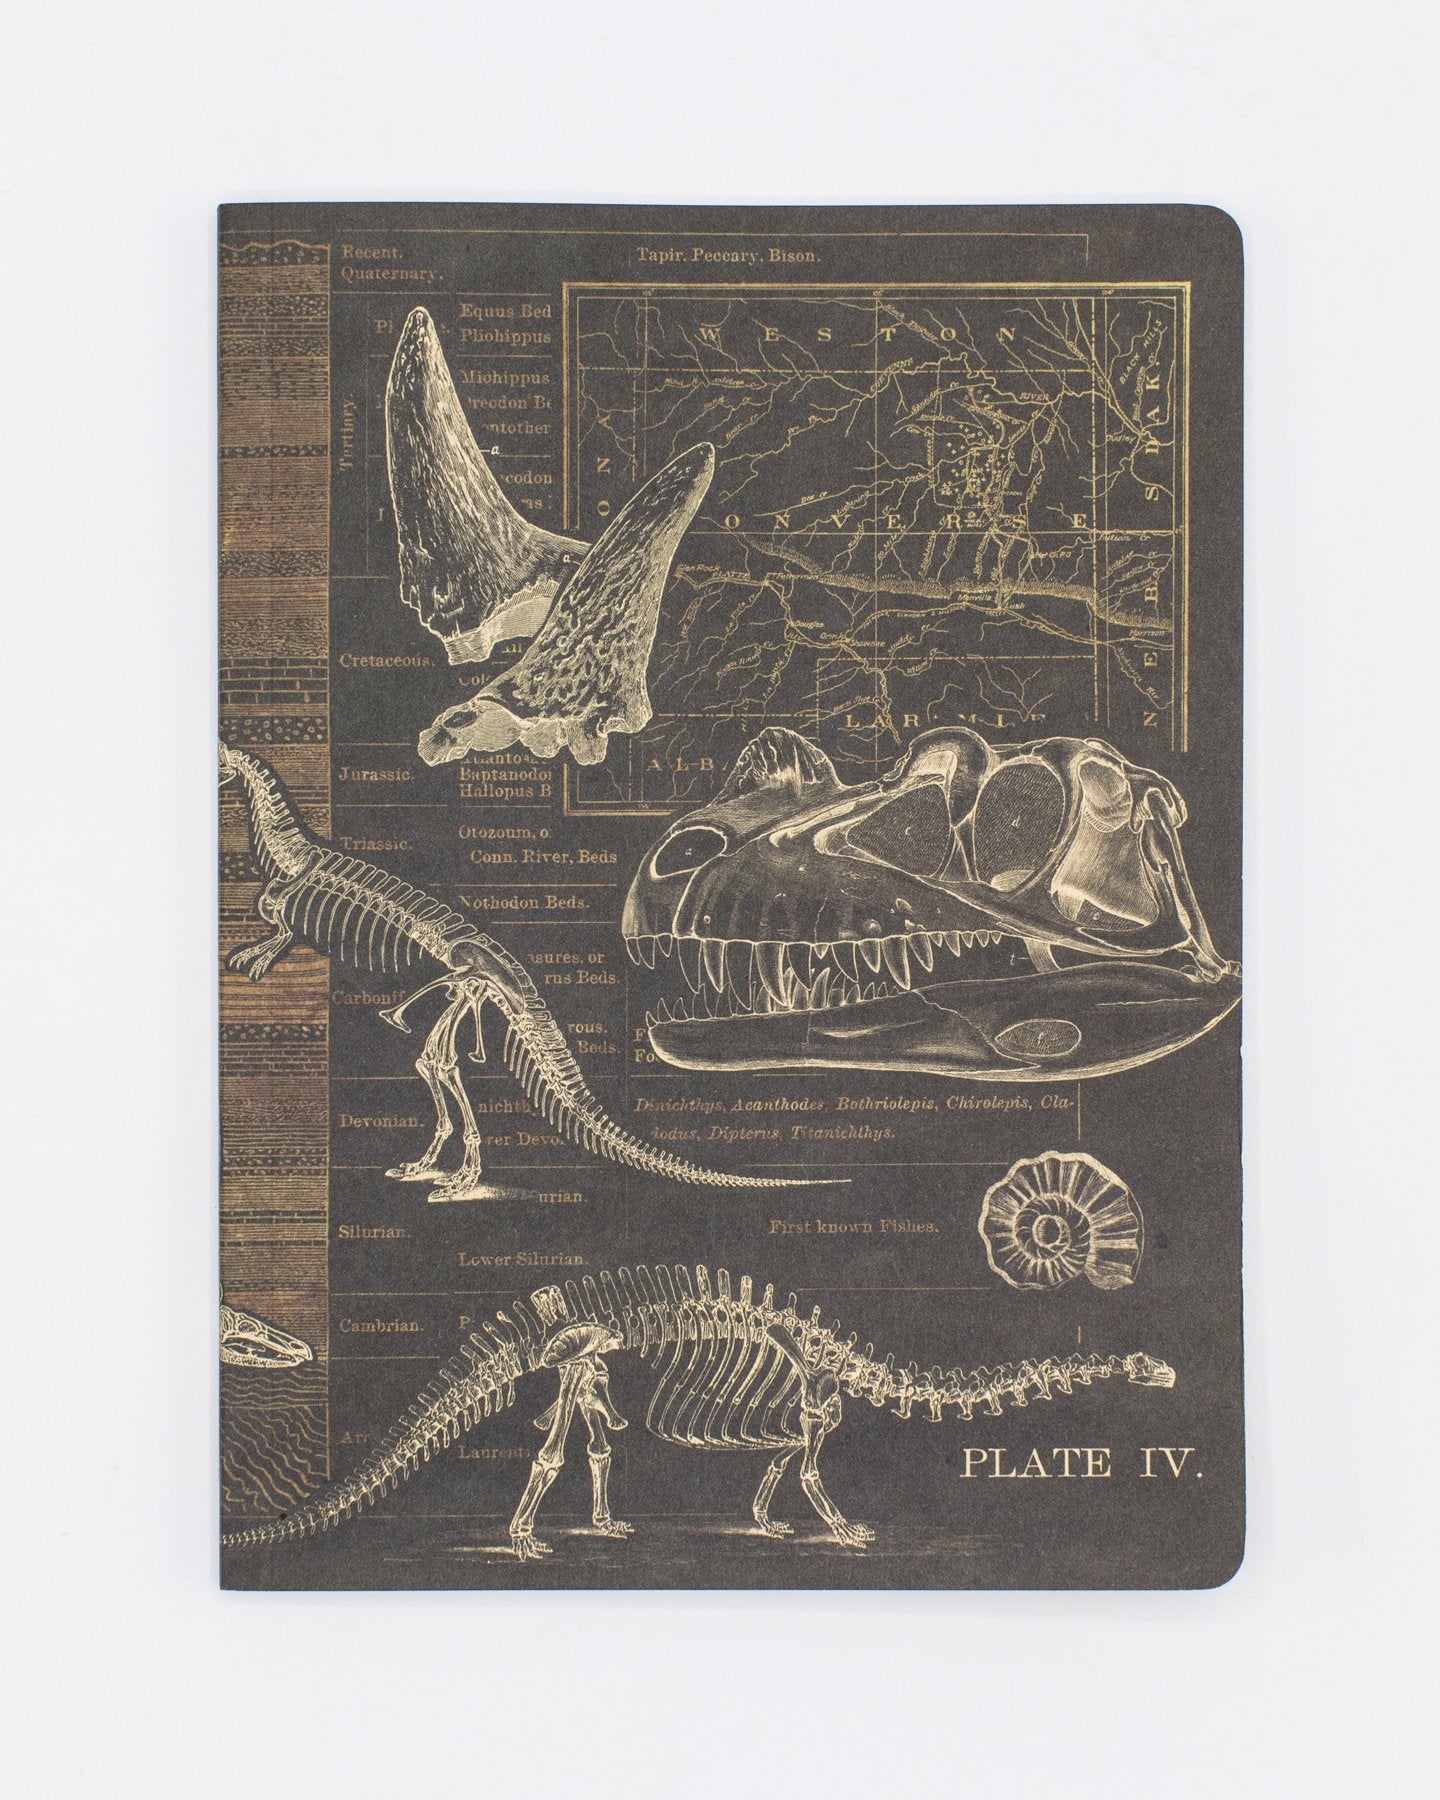 Dinosaur Softcover Notebook - Dot Grid